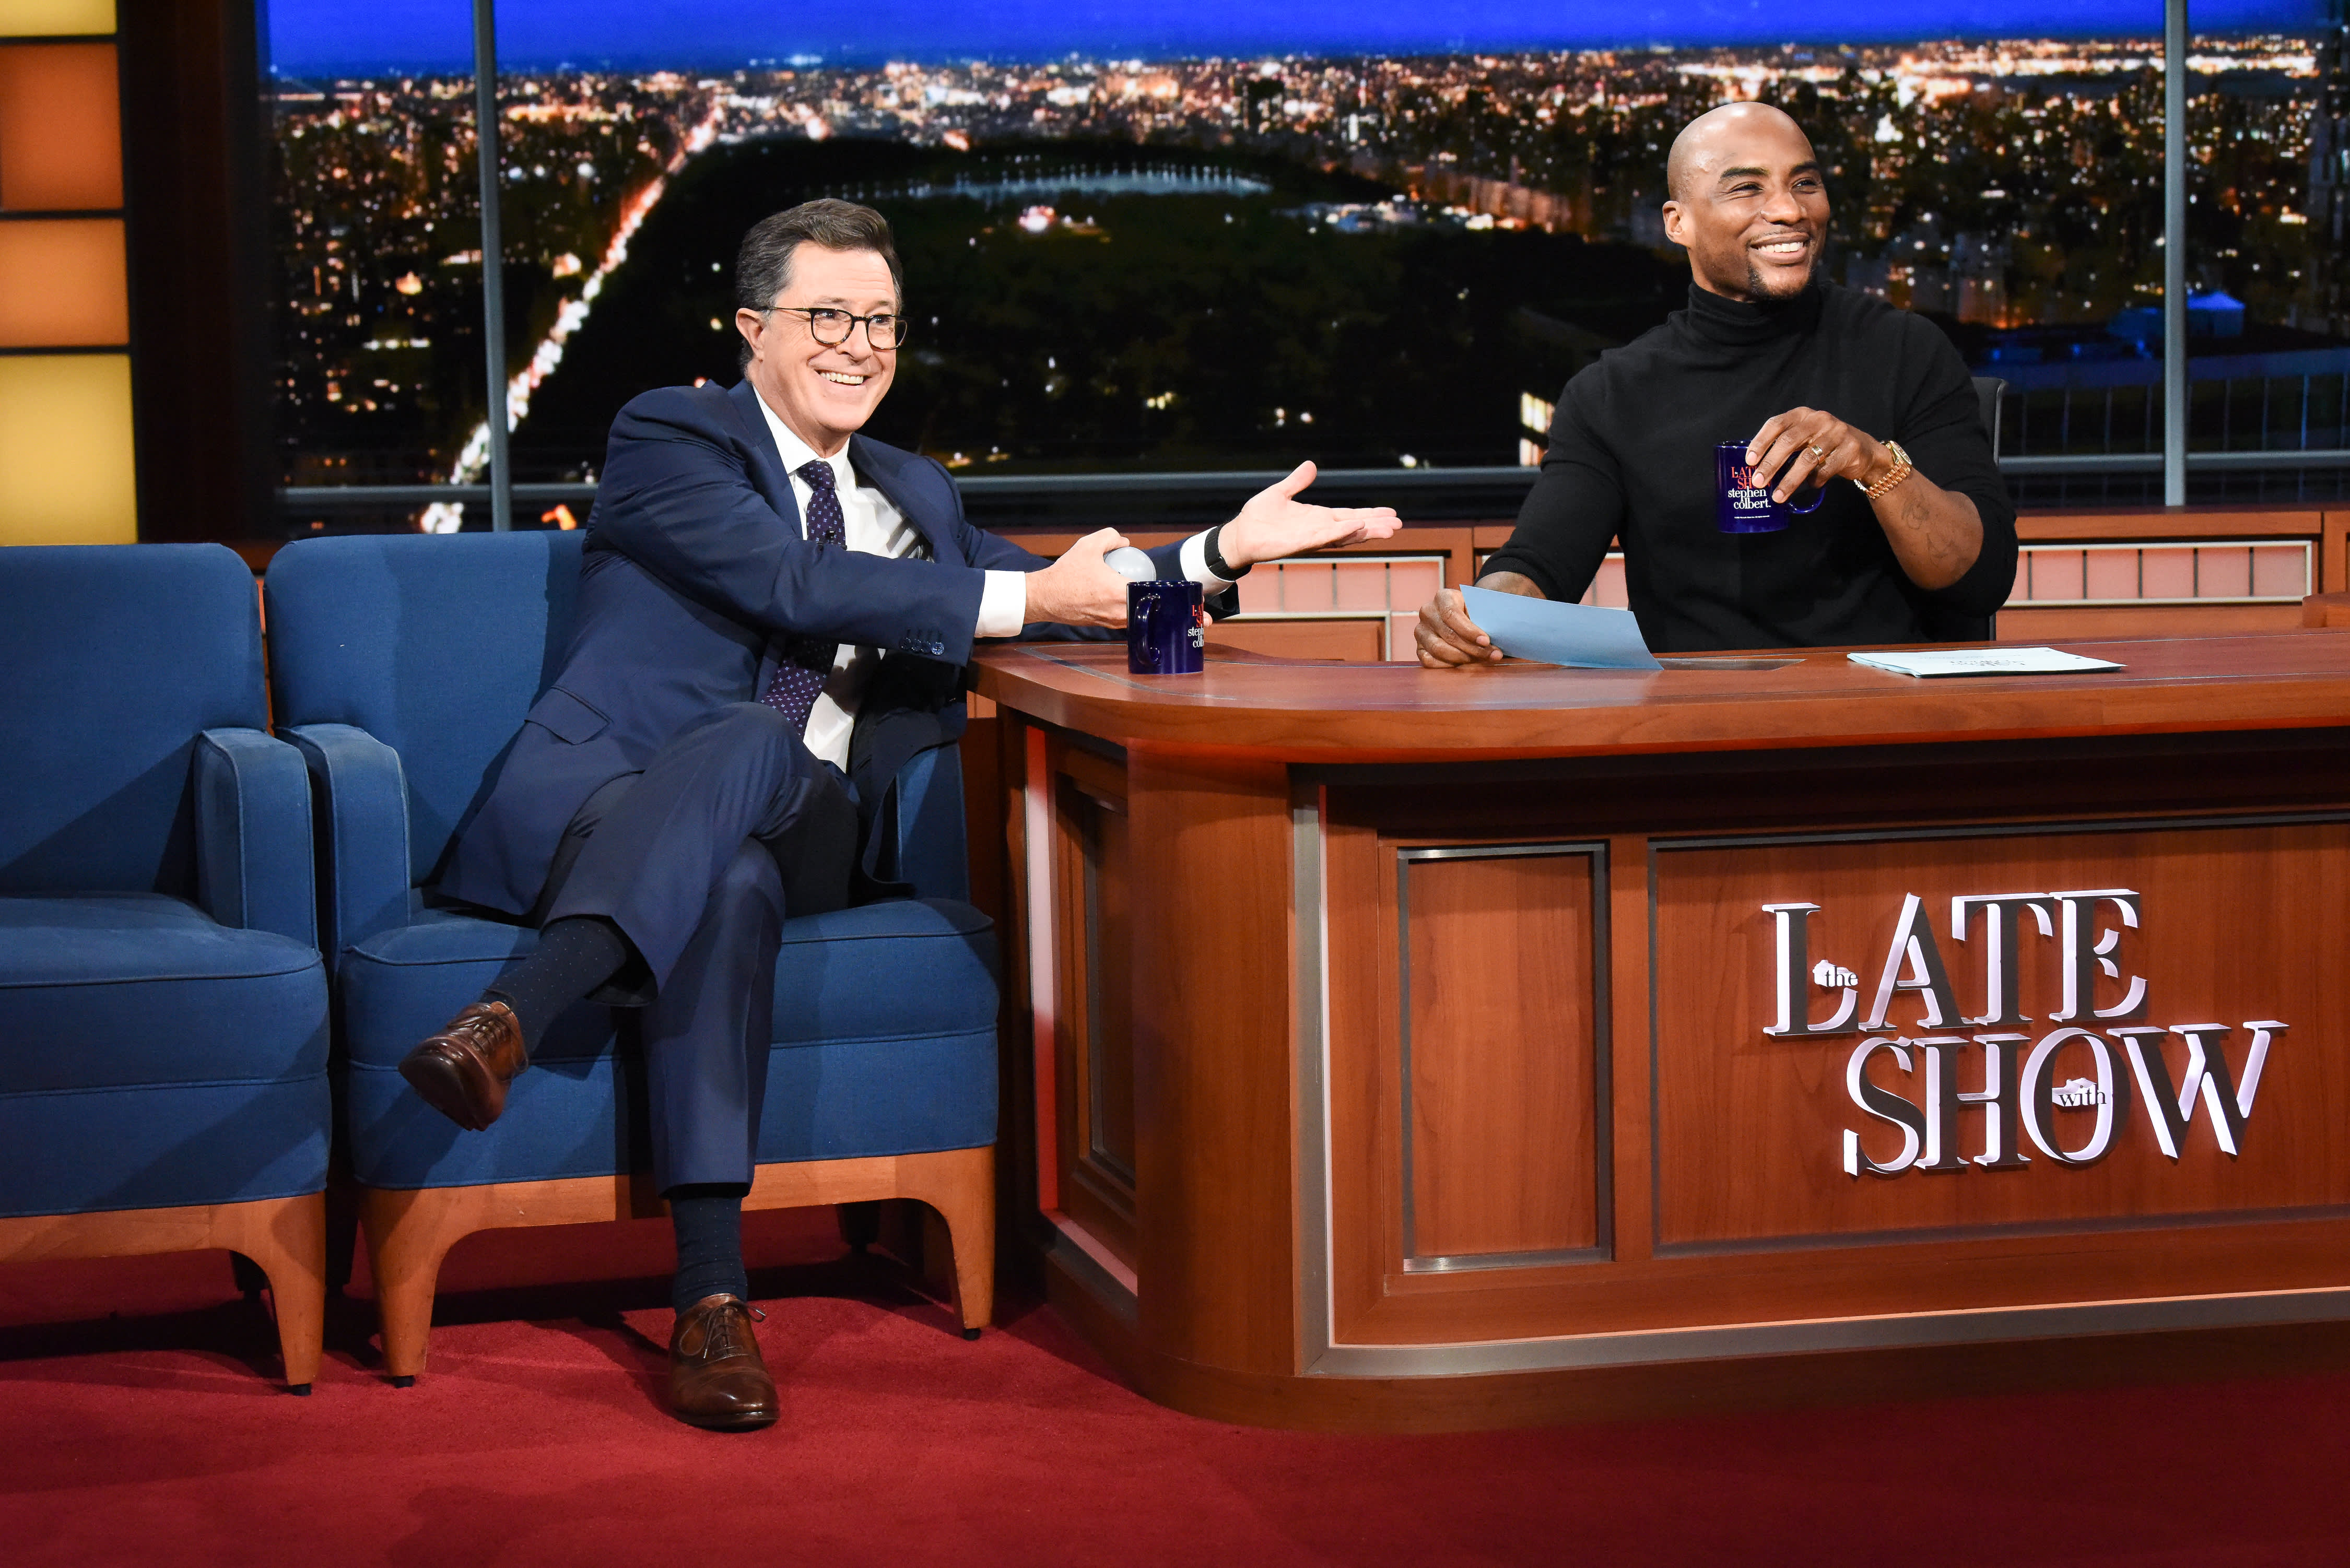 Charlamagne Tha God and Stephen Colbert to launch late night TV talk show on Comedy Central - CNBC